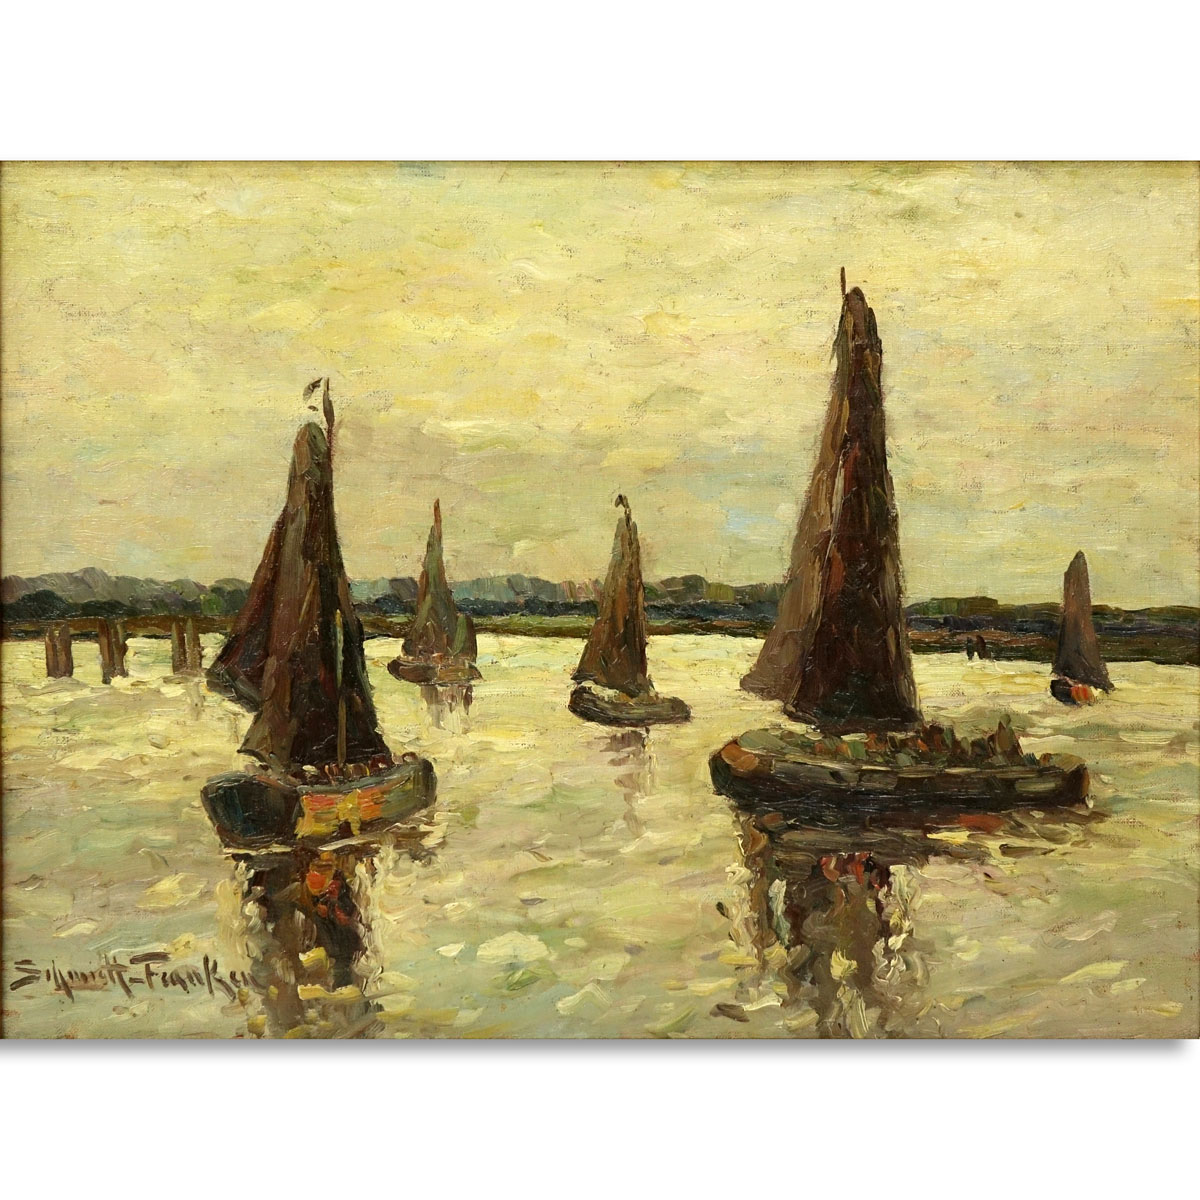 Maria Schmidt-Franken, German (1889-1967) Oil on Canvas, Sailboats in Open Water, Signed Lower Left. Tag with artist name attached to frame, Inscribed en verso.